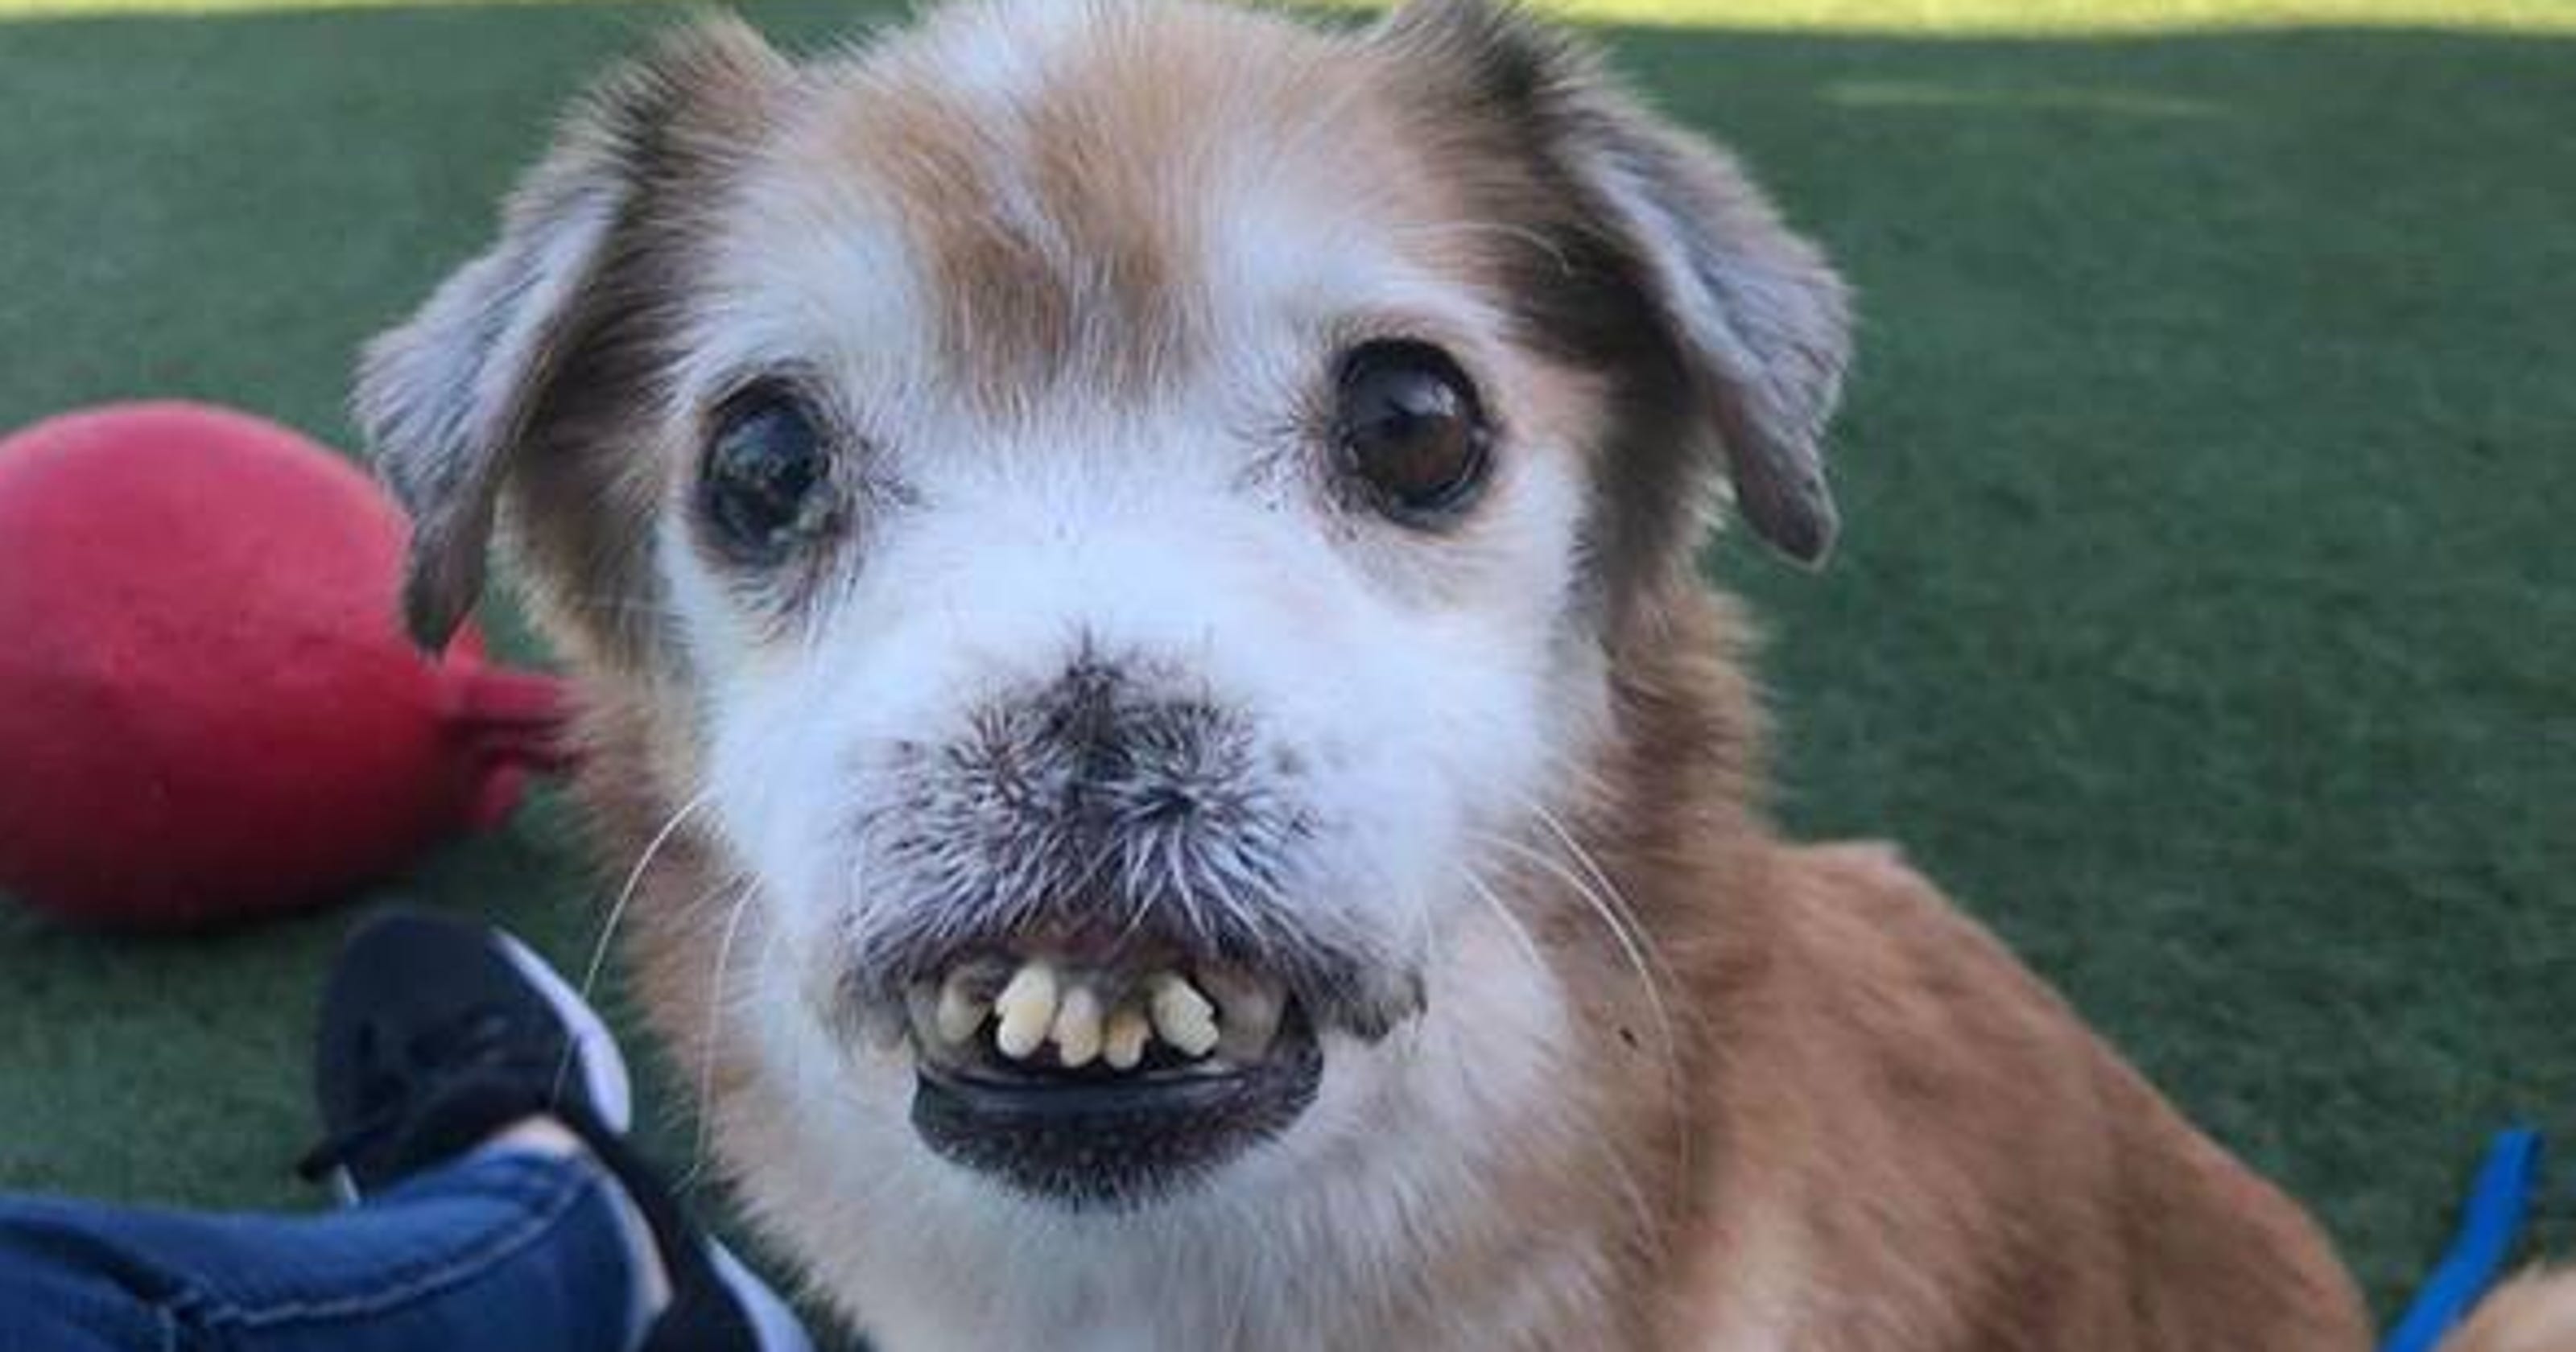 Sniffles, an adoptable dog without a nose, gets outpouring of love